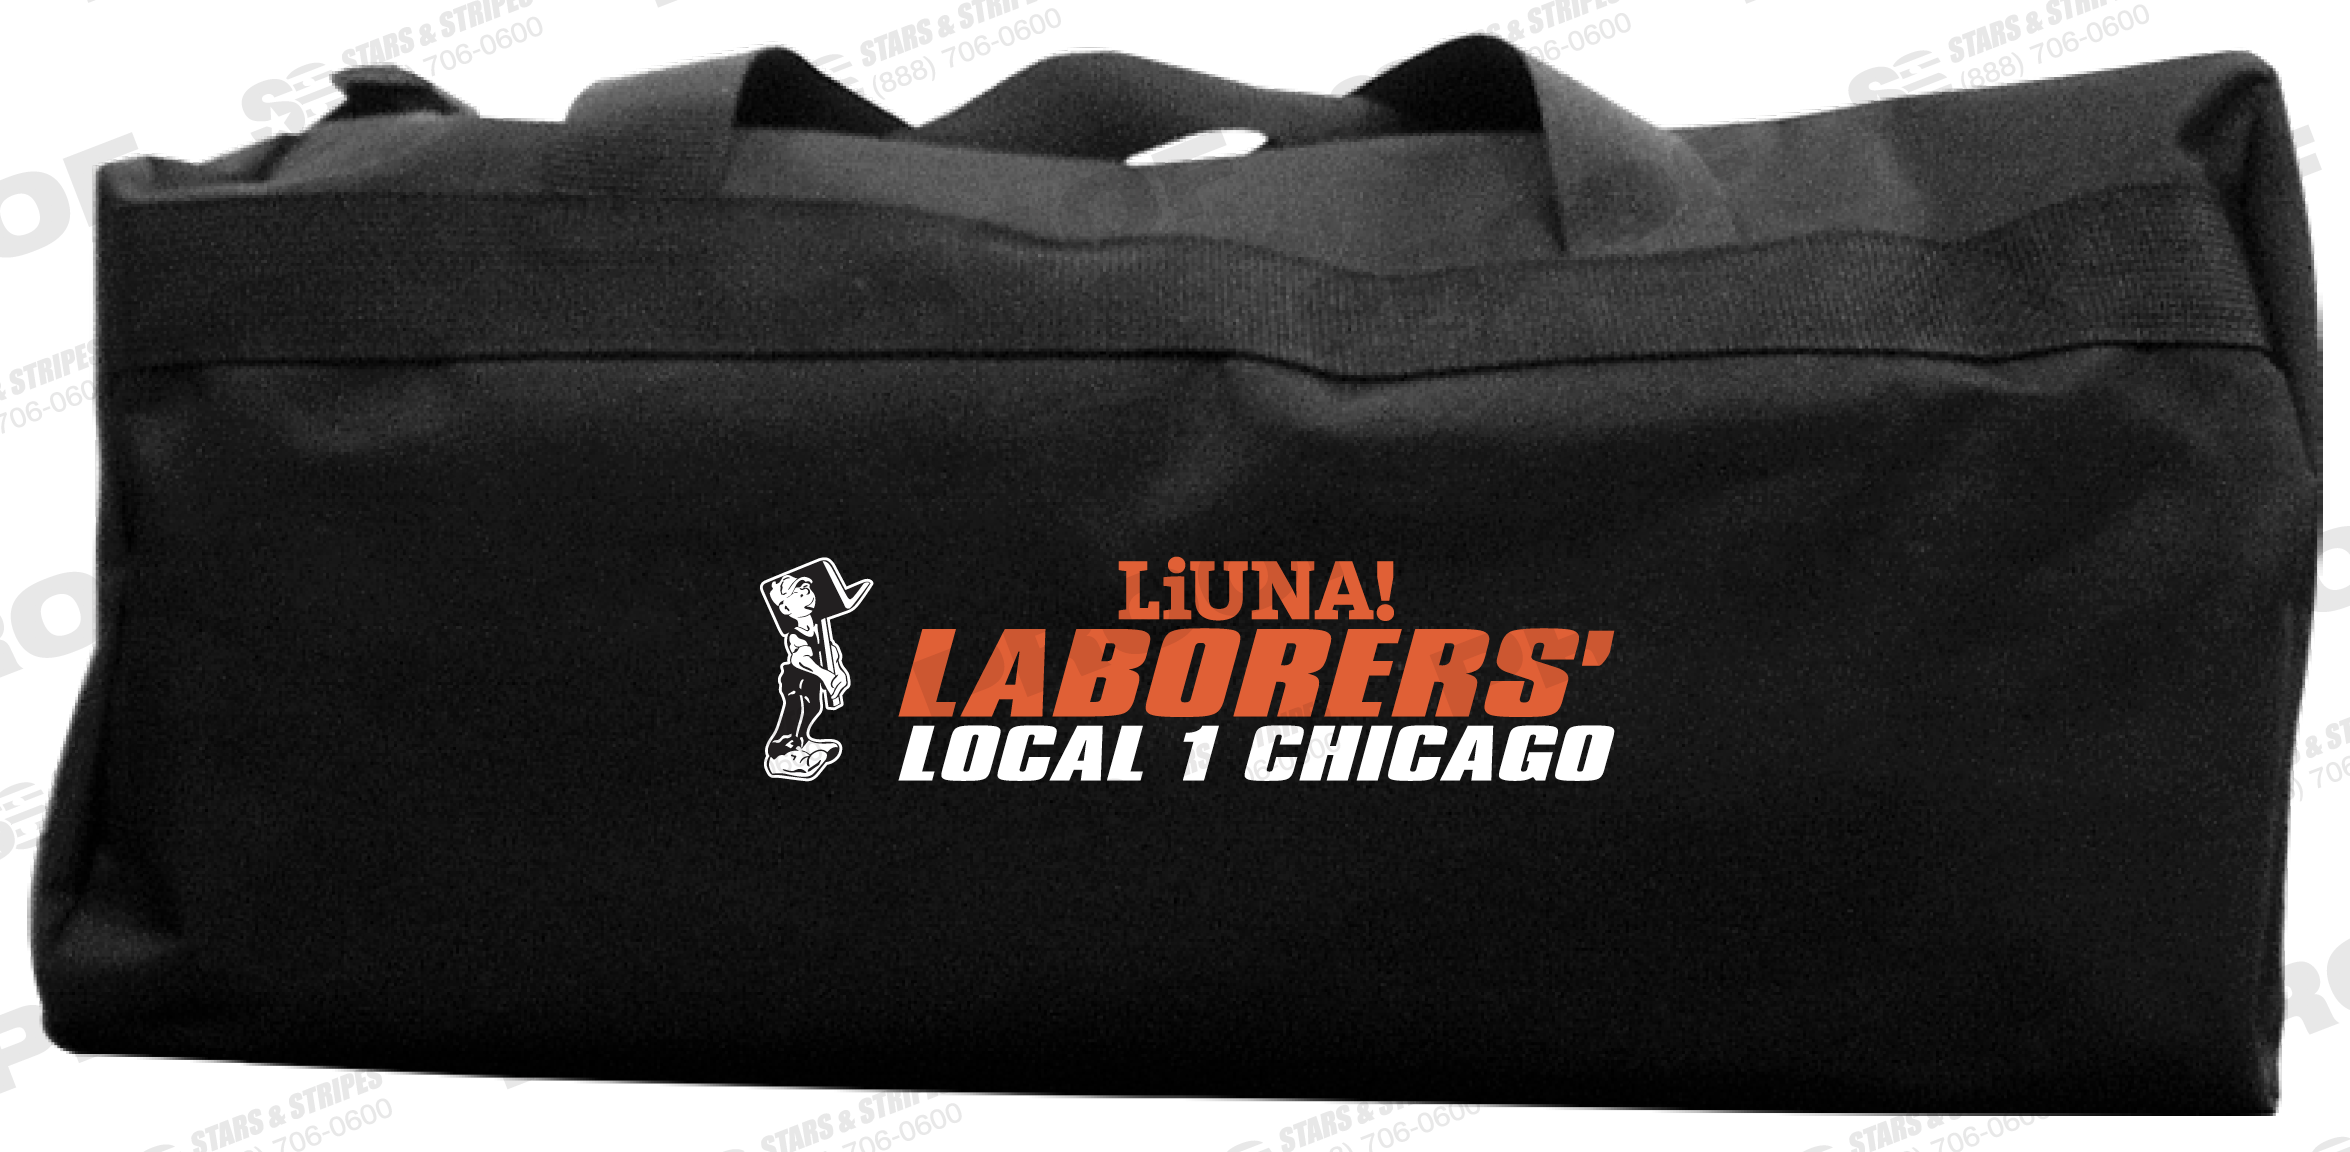 Get a Local One duffle bag for paying 2021 dues in full!